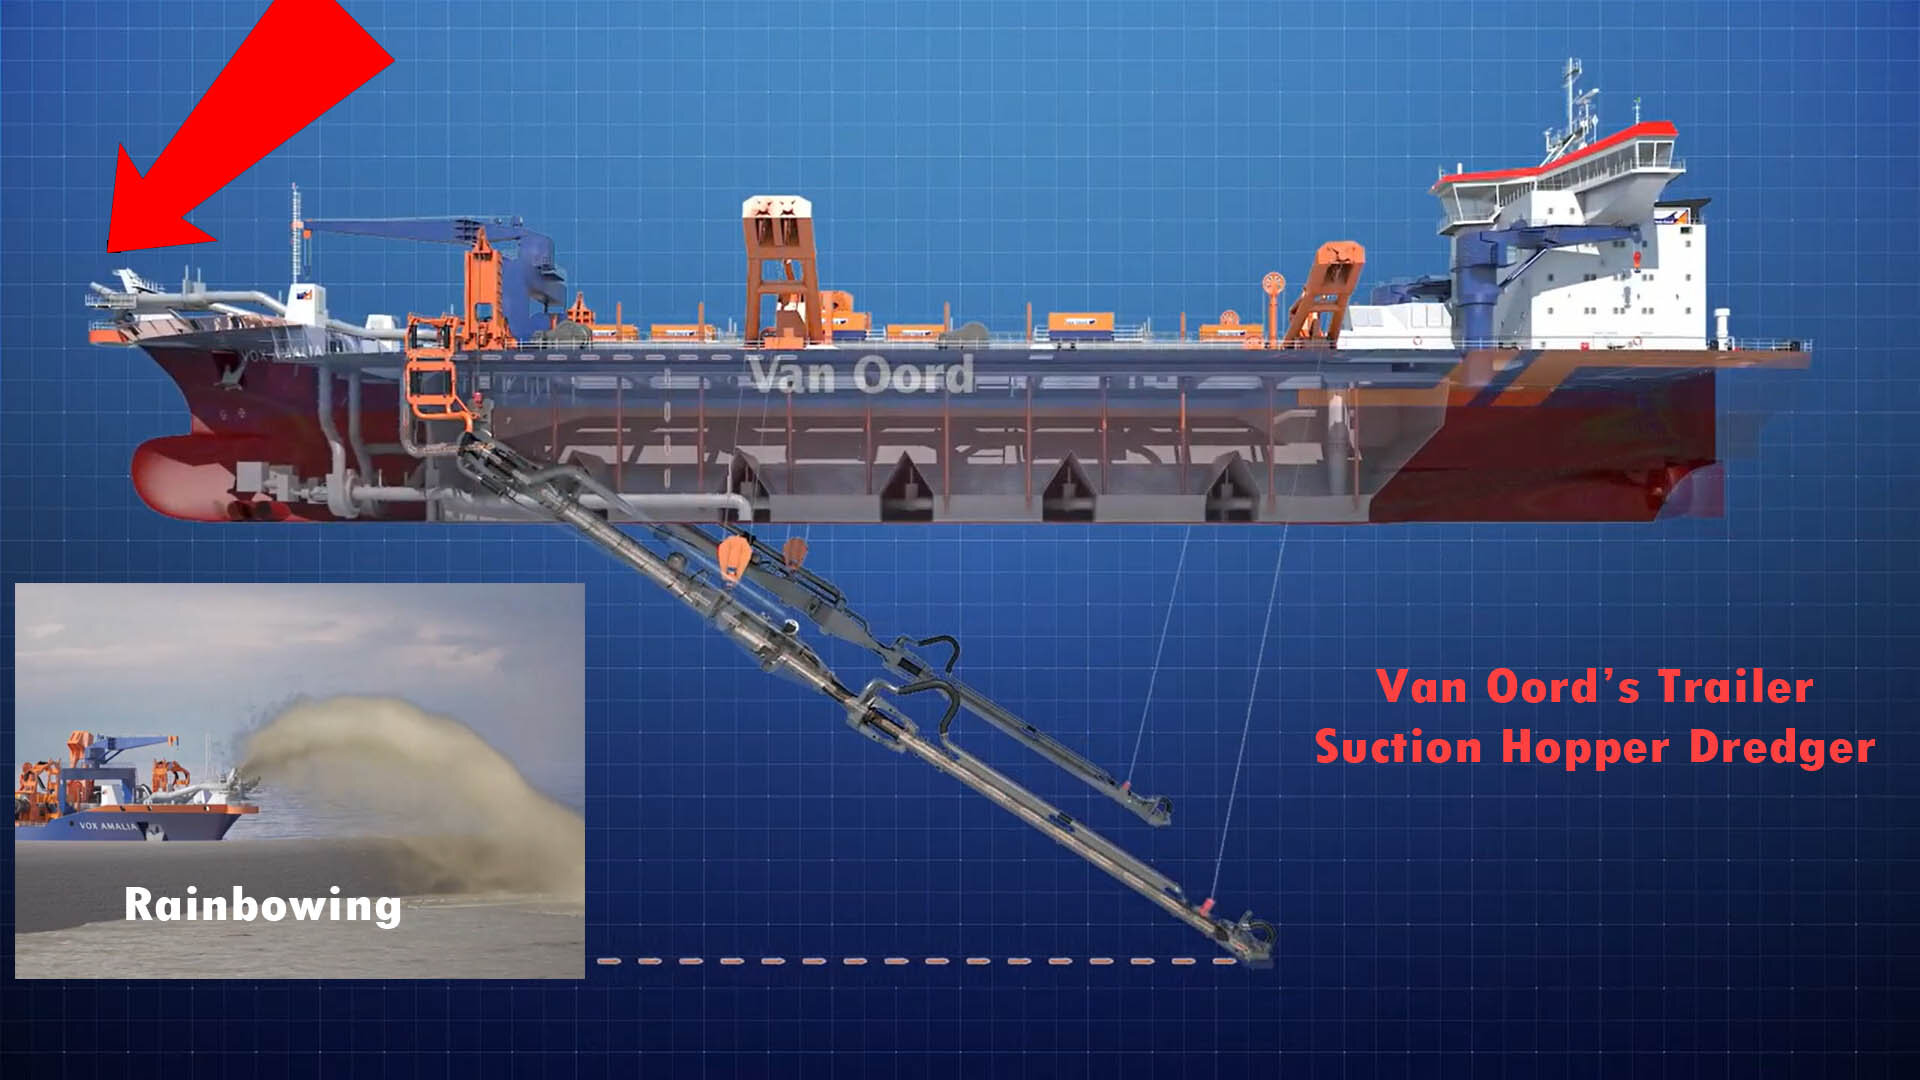 Trailing Suction Hopper Dredger also showing "rainbowing" method.